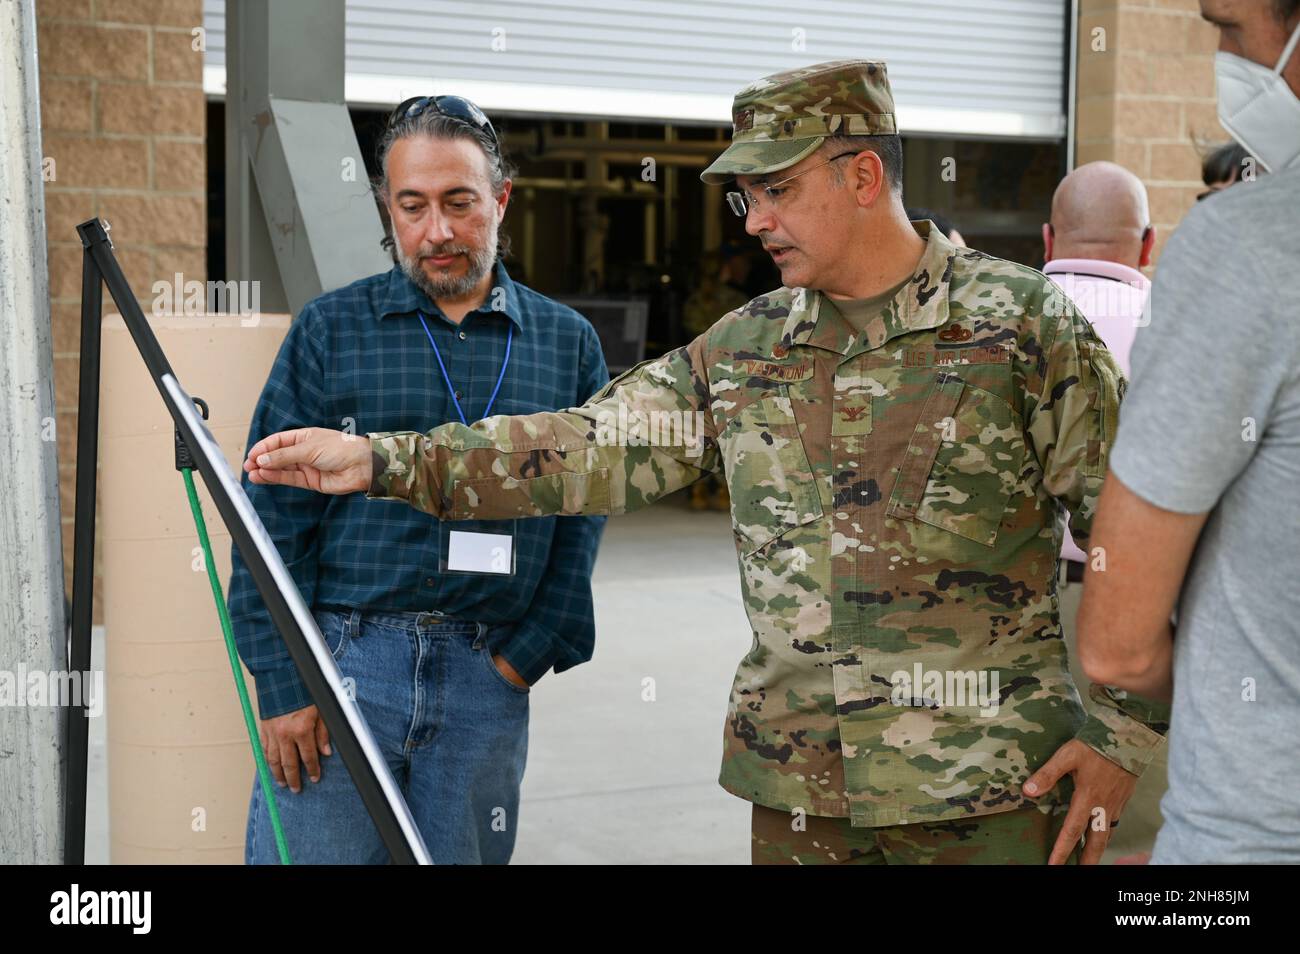 Col. Jason Vattioni, 377th Air Base Wing commander, discusses the Bulk Fuels Facility Cleanup Project with Ben Mouyyad, U.S. Army Corps of Engineers technical lead, at the Groundwater Treatment Facility at Kirtland Air Force Base, NM, July 21, 2022. The Groundwater Treatment Facility cleans ethylene dibromide (EDB) from the drinking water supply. Stock Photo